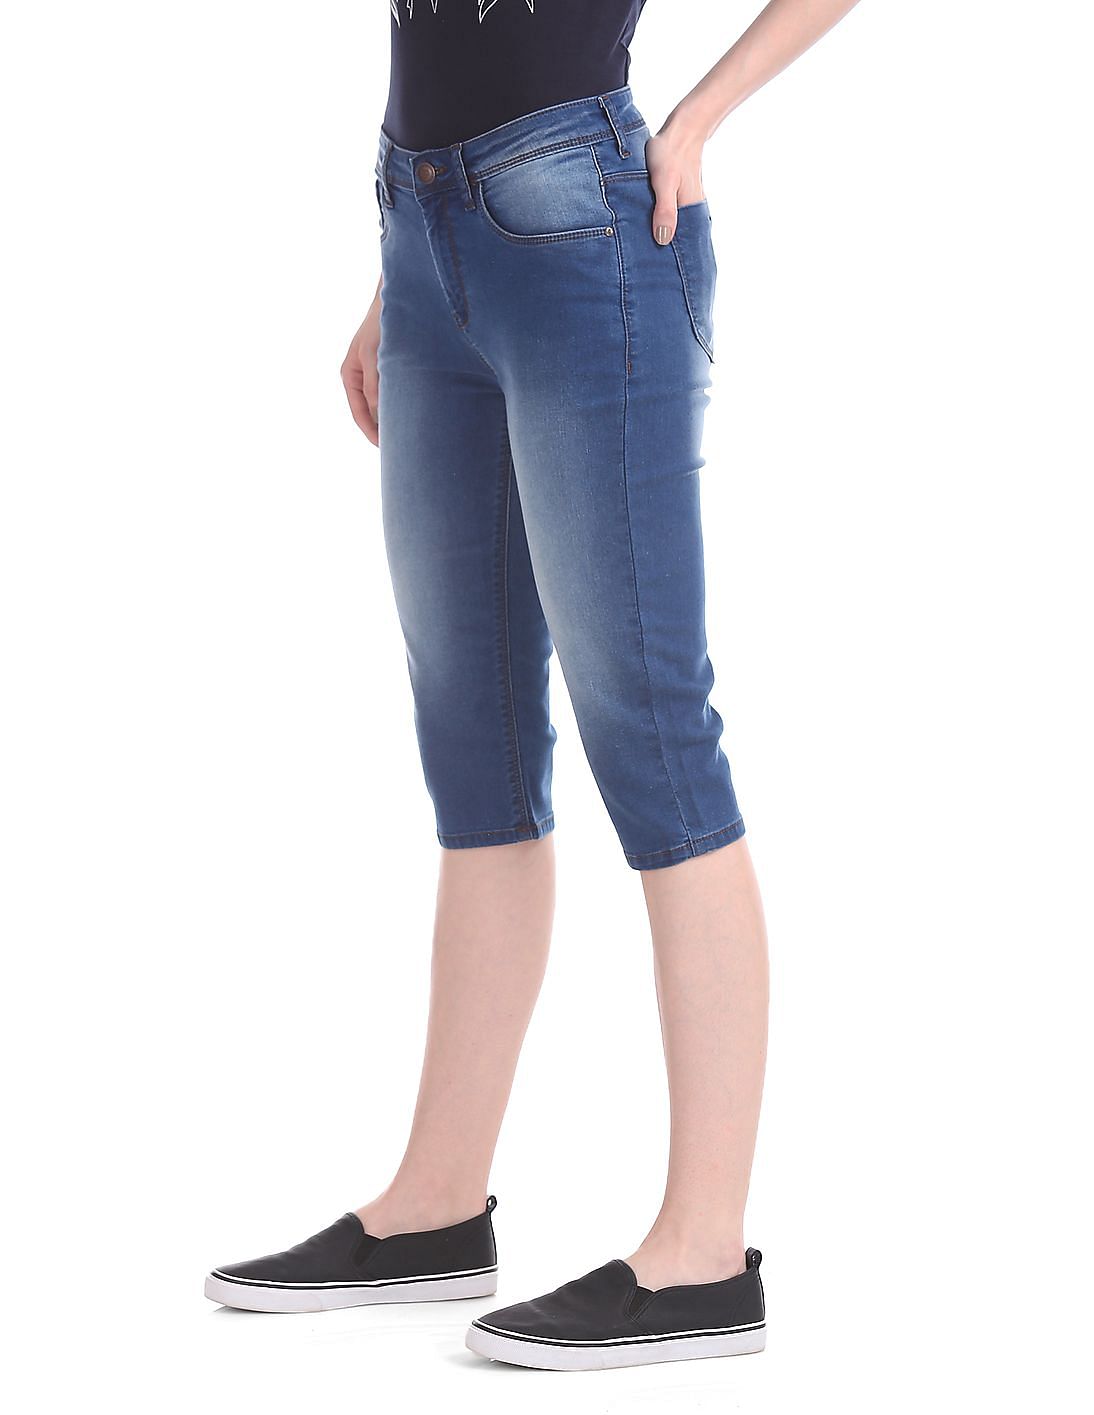 Ladies Skinny Fit Capri Jeans For Casual Wear at Best Price in Ahmedabad   Vm Knits